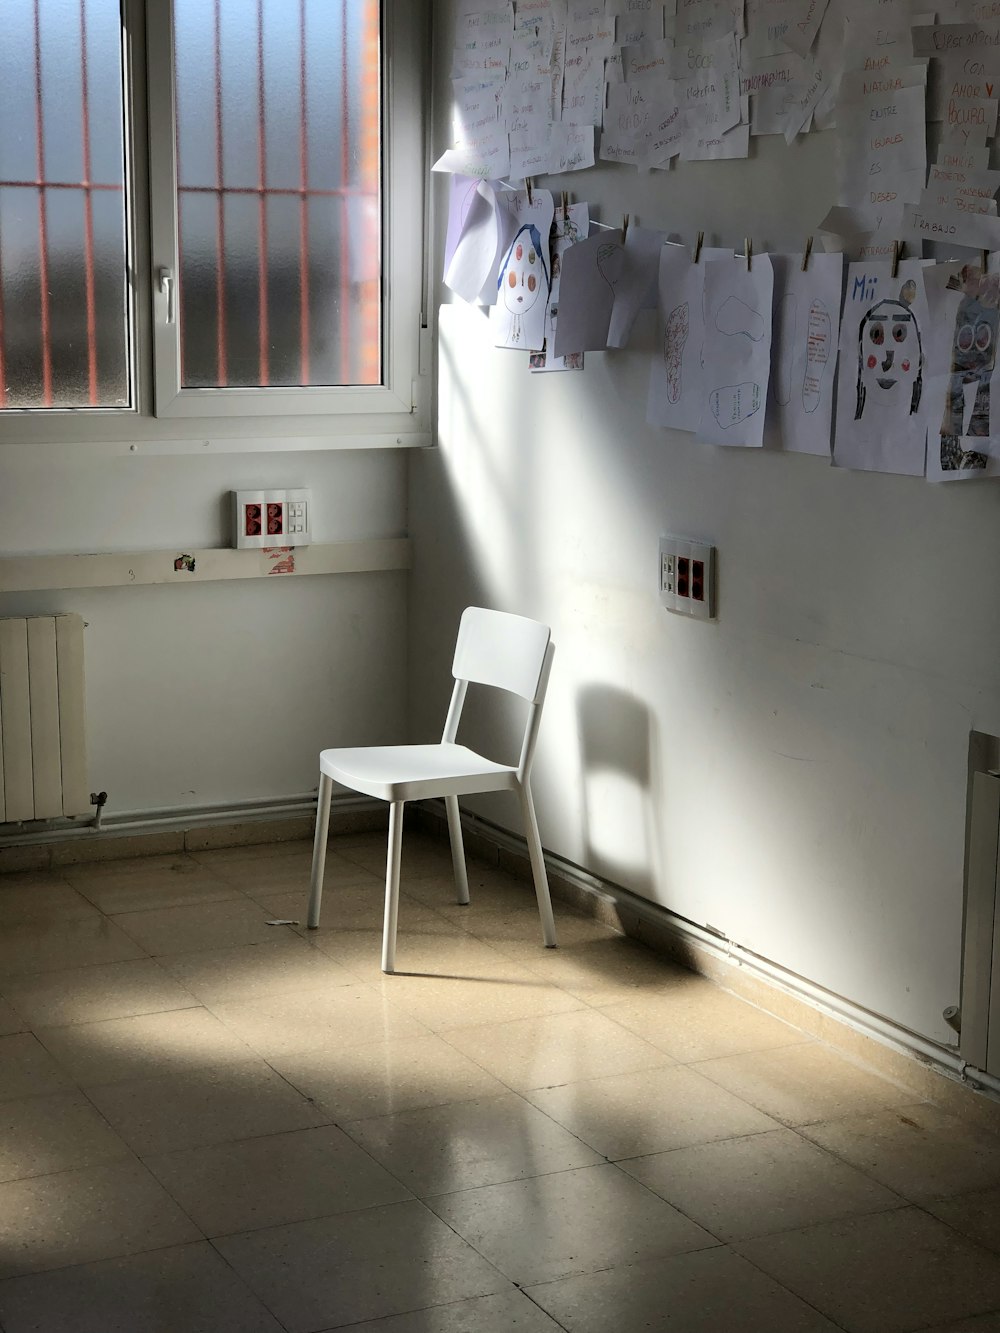 empty armless chair by wall with hanging papers